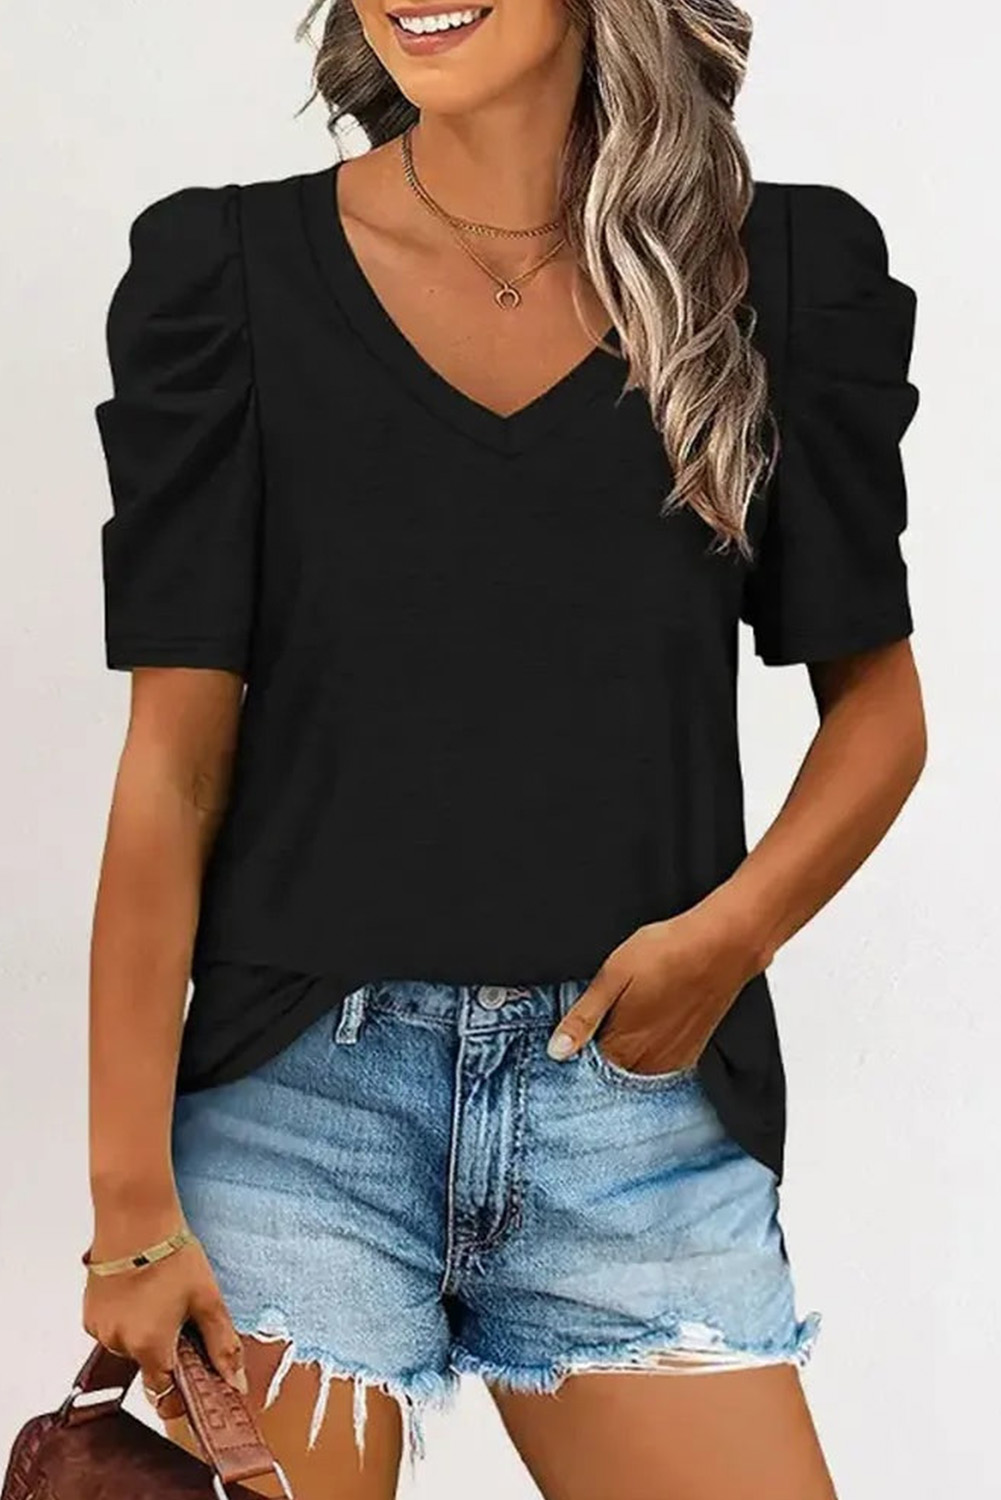 Shewin Wholesale Clothing Suppliers Black Puff Sleeve Casual V Neck T-SHIRT